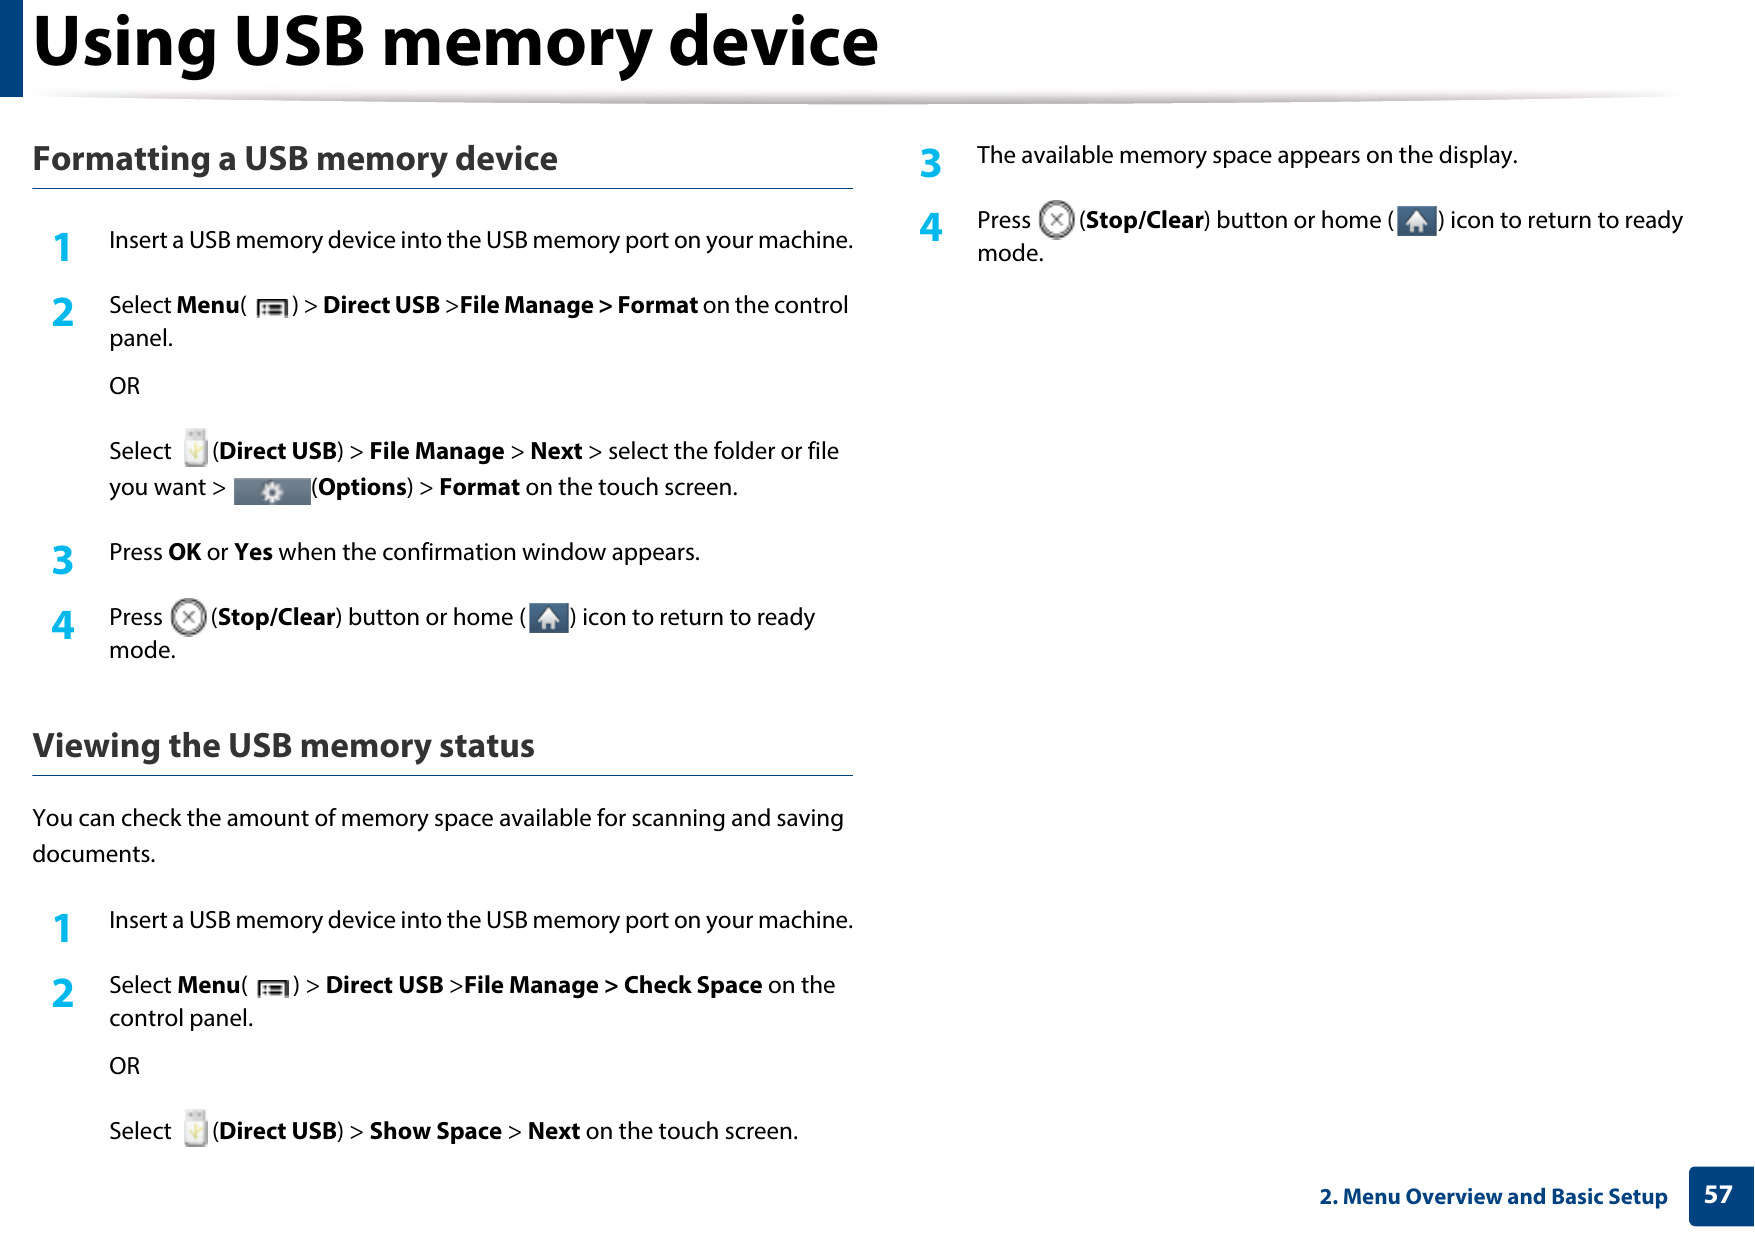 Using USB memory device572. Menu Overview and Basic SetupFormatting a USB memory device1Insert a USB memory device into the USB memory port on your machine.2  Select Menu() &gt; Direct USB &gt;File Manage &gt; Format on the control panel.ORSelect (Direct USB) &gt; File Manage &gt; Next &gt; select the folder or file you want &gt;  (Options) &gt; Format on the touch screen.3  Press OK or Yes when the confirmation window appears.4  Press (Stop/Clear) button or home ( ) icon to return to ready mode.Viewing the USB memory statusYou can check the amount of memory space available for scanning and saving documents.1Insert a USB memory device into the USB memory port on your machine.2  Select Menu() &gt; Direct USB &gt;File Manage &gt; Check Space on the control panel.ORSelect (Direct USB) &gt; Show Space &gt; Next on the touch screen.3  The available memory space appears on the display.4  Press (Stop/Clear) button or home ( ) icon to return to ready mode.